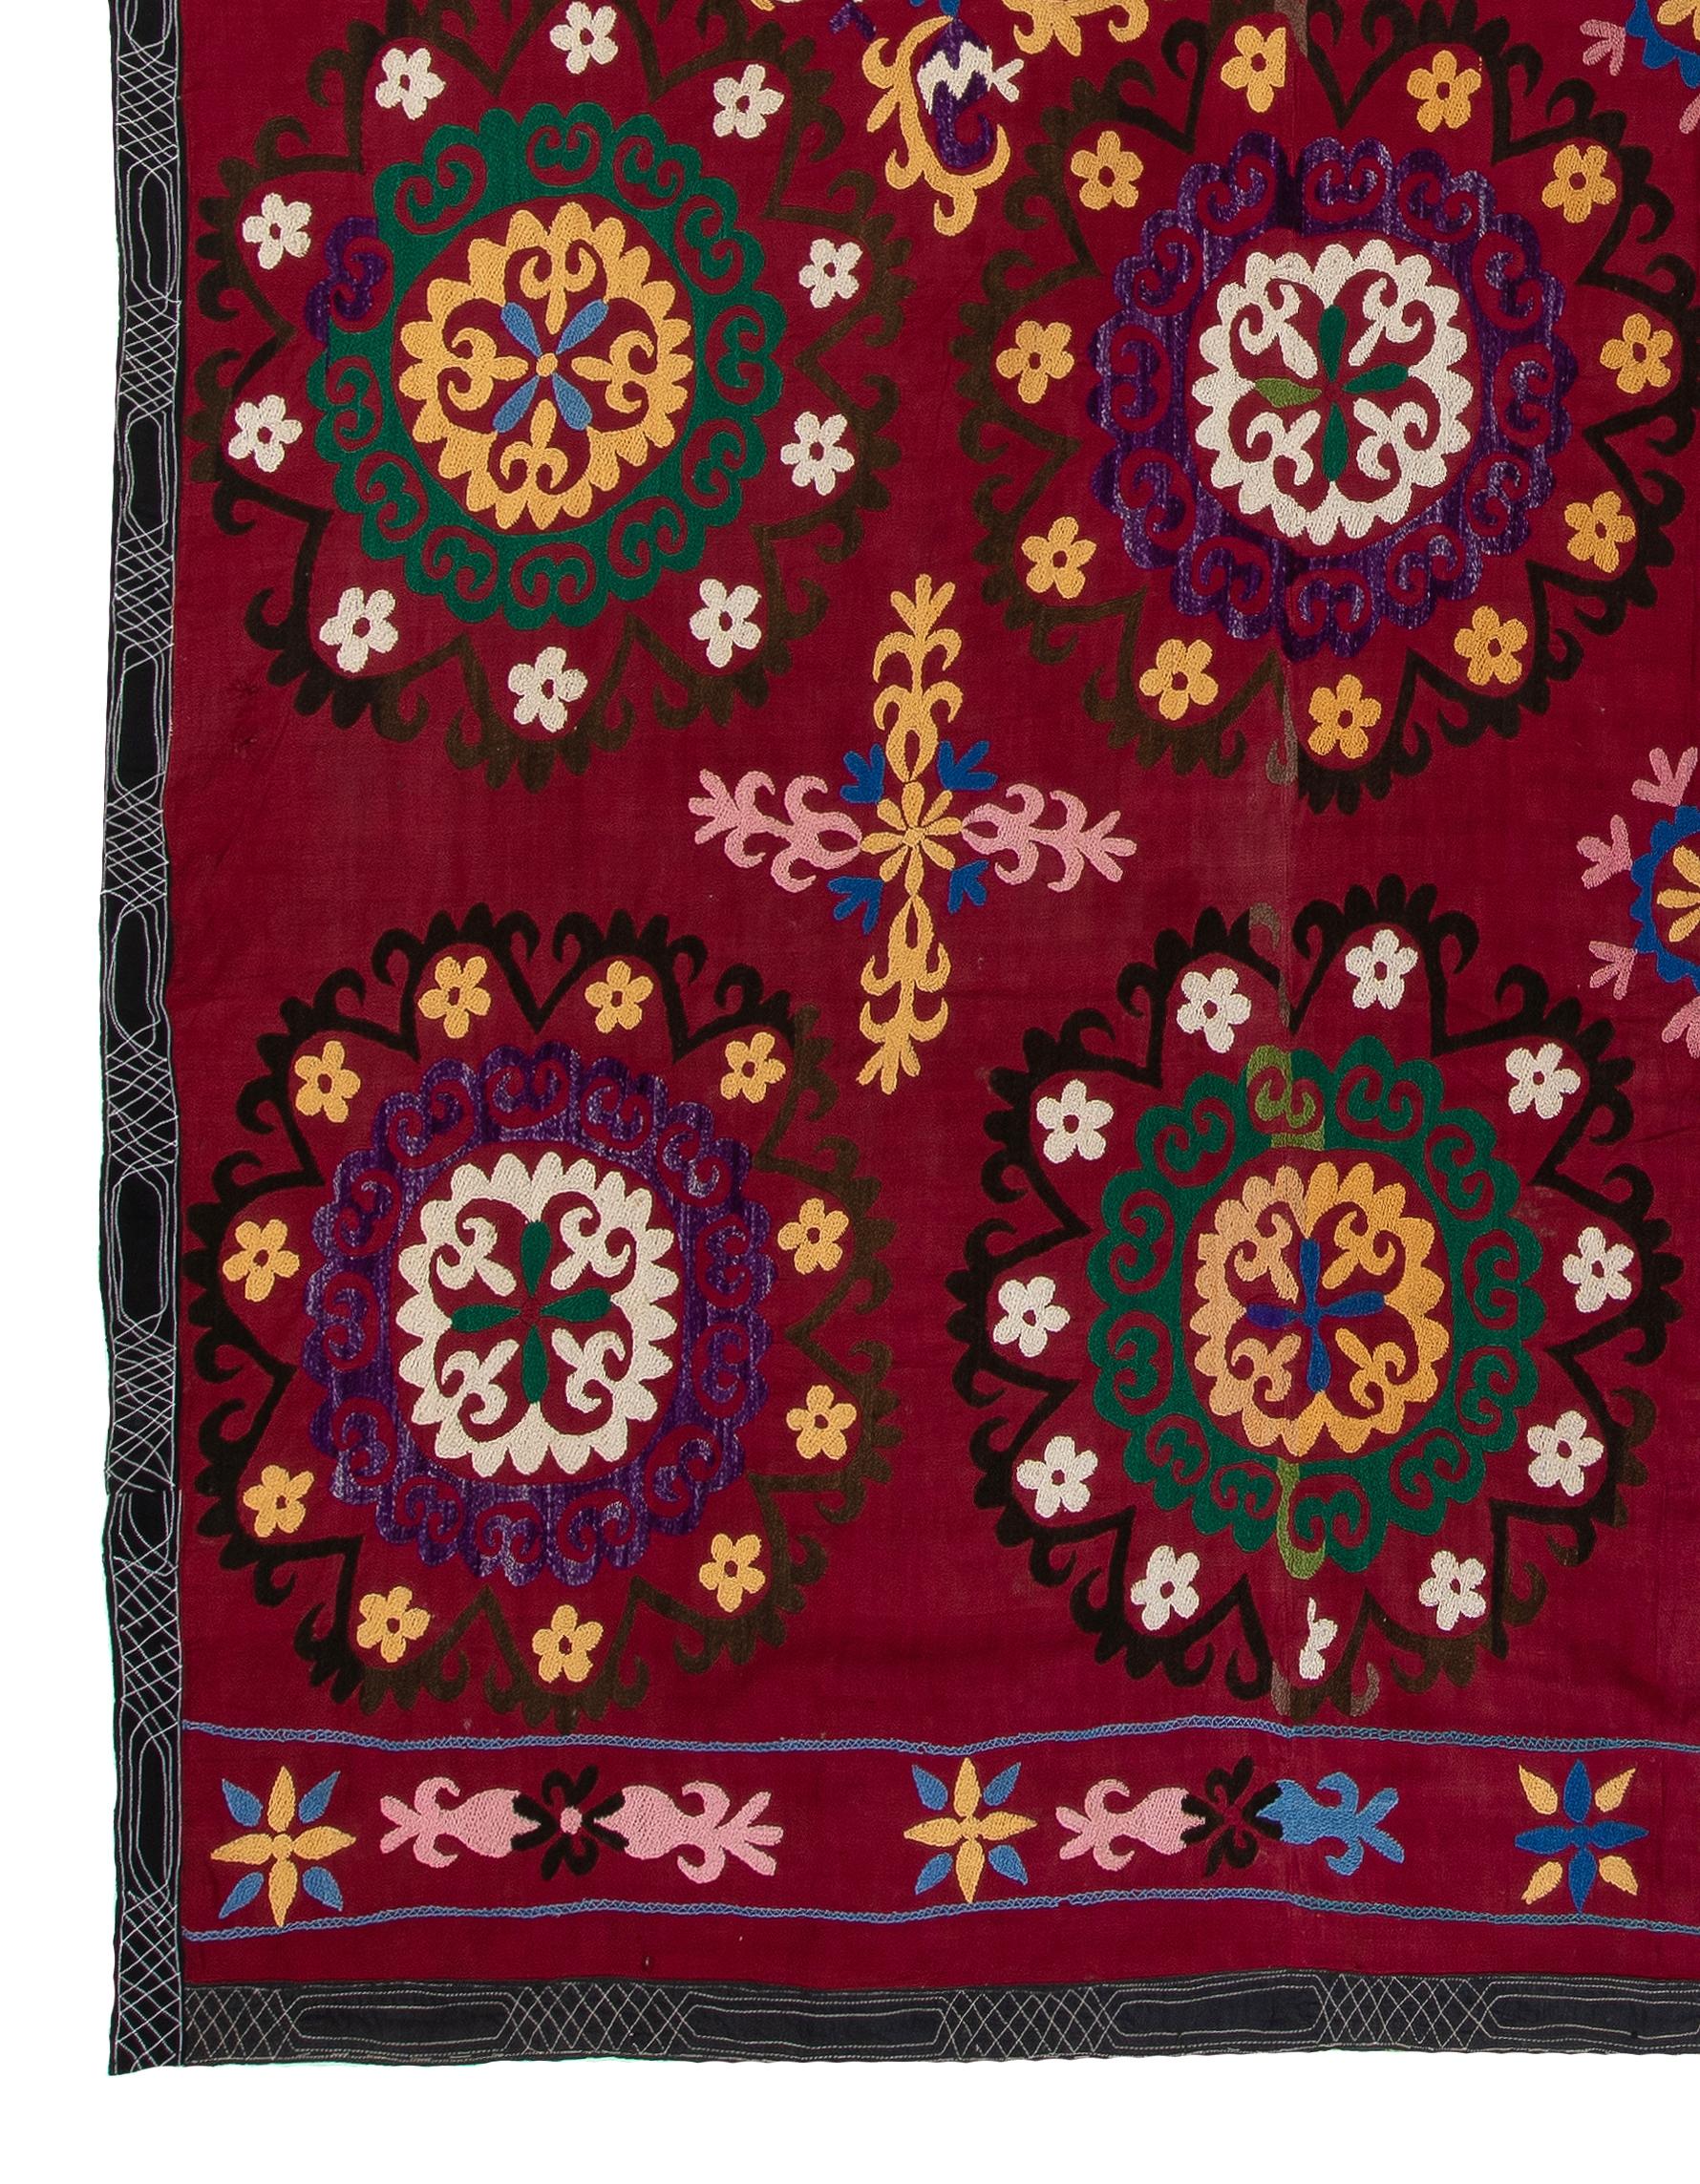 20th Century 6.8x7.8 Ft Central Asian Suzani Textile, Embroidered Cotton & Silk Wall Hanging For Sale